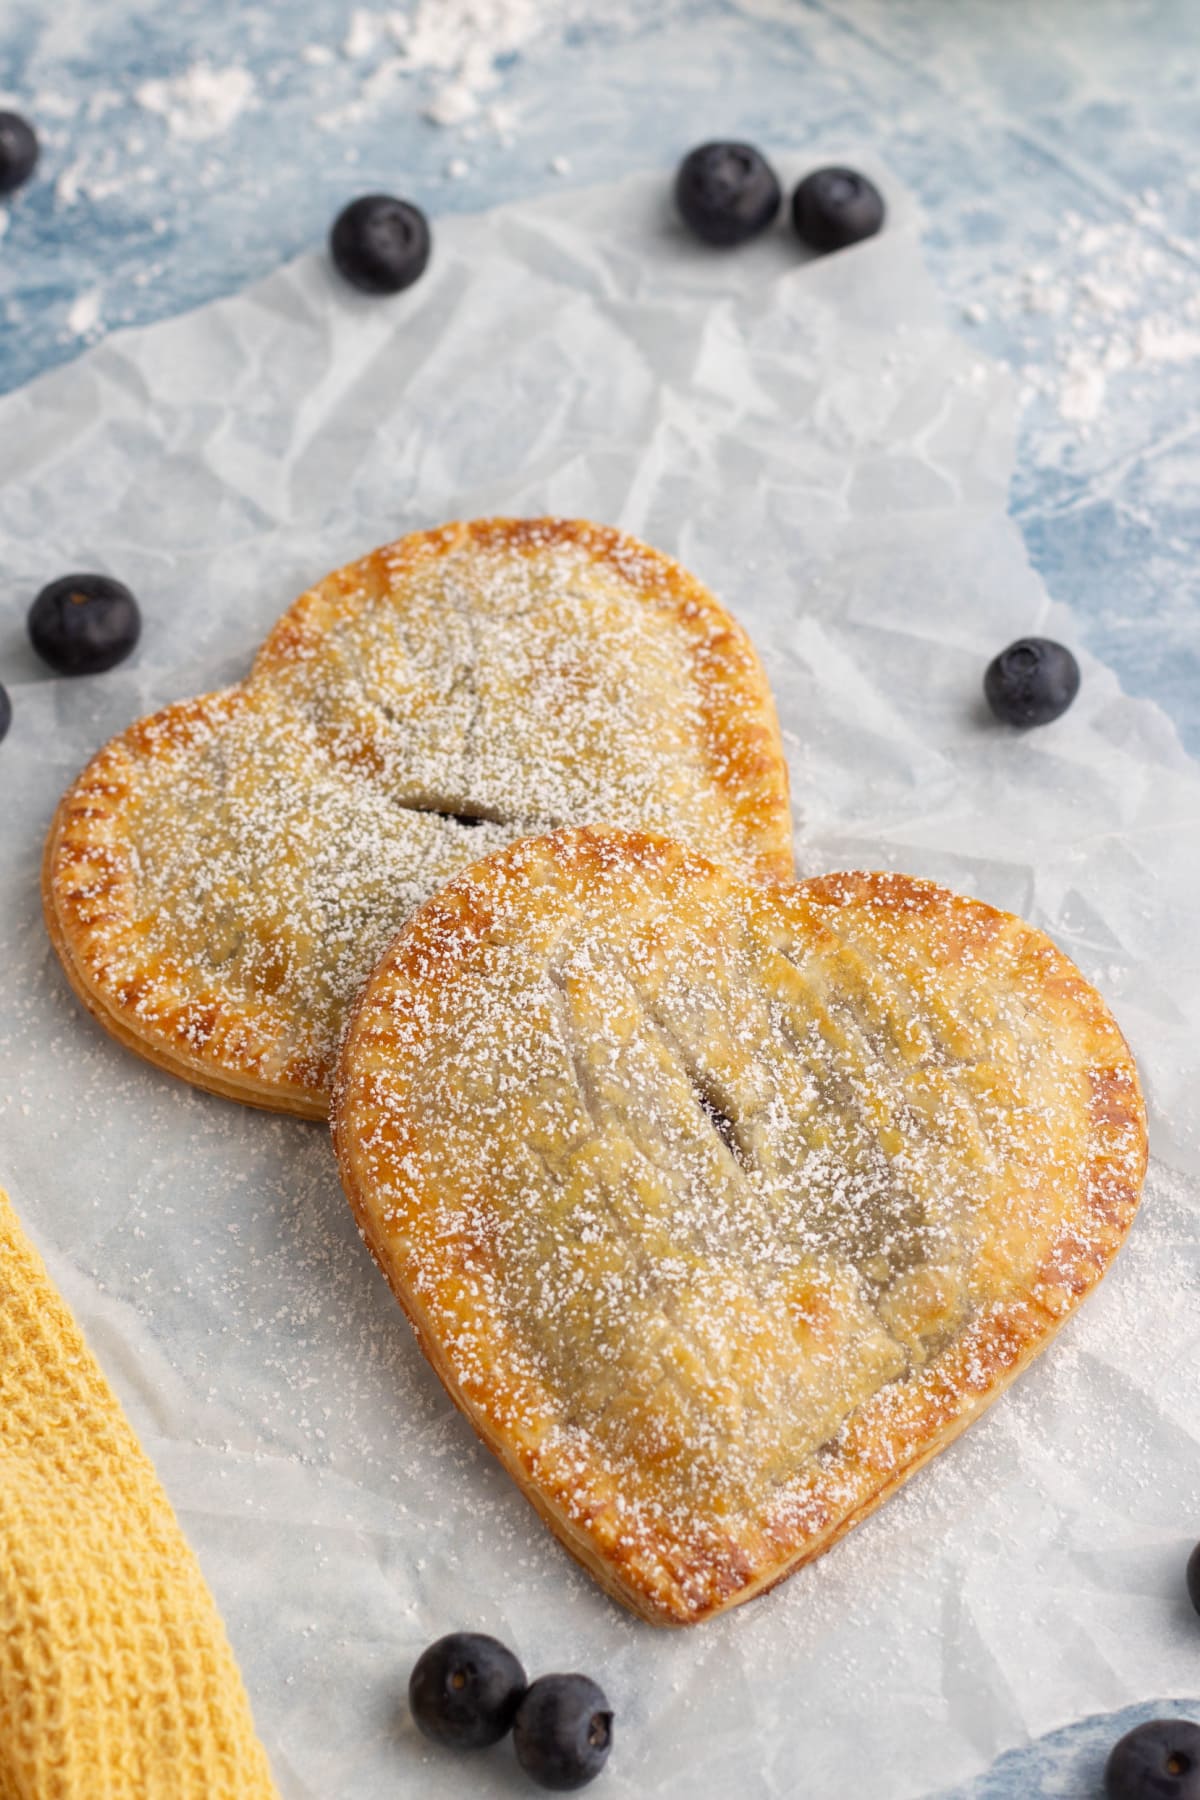 Blueberry hand pies up close on parchment paper